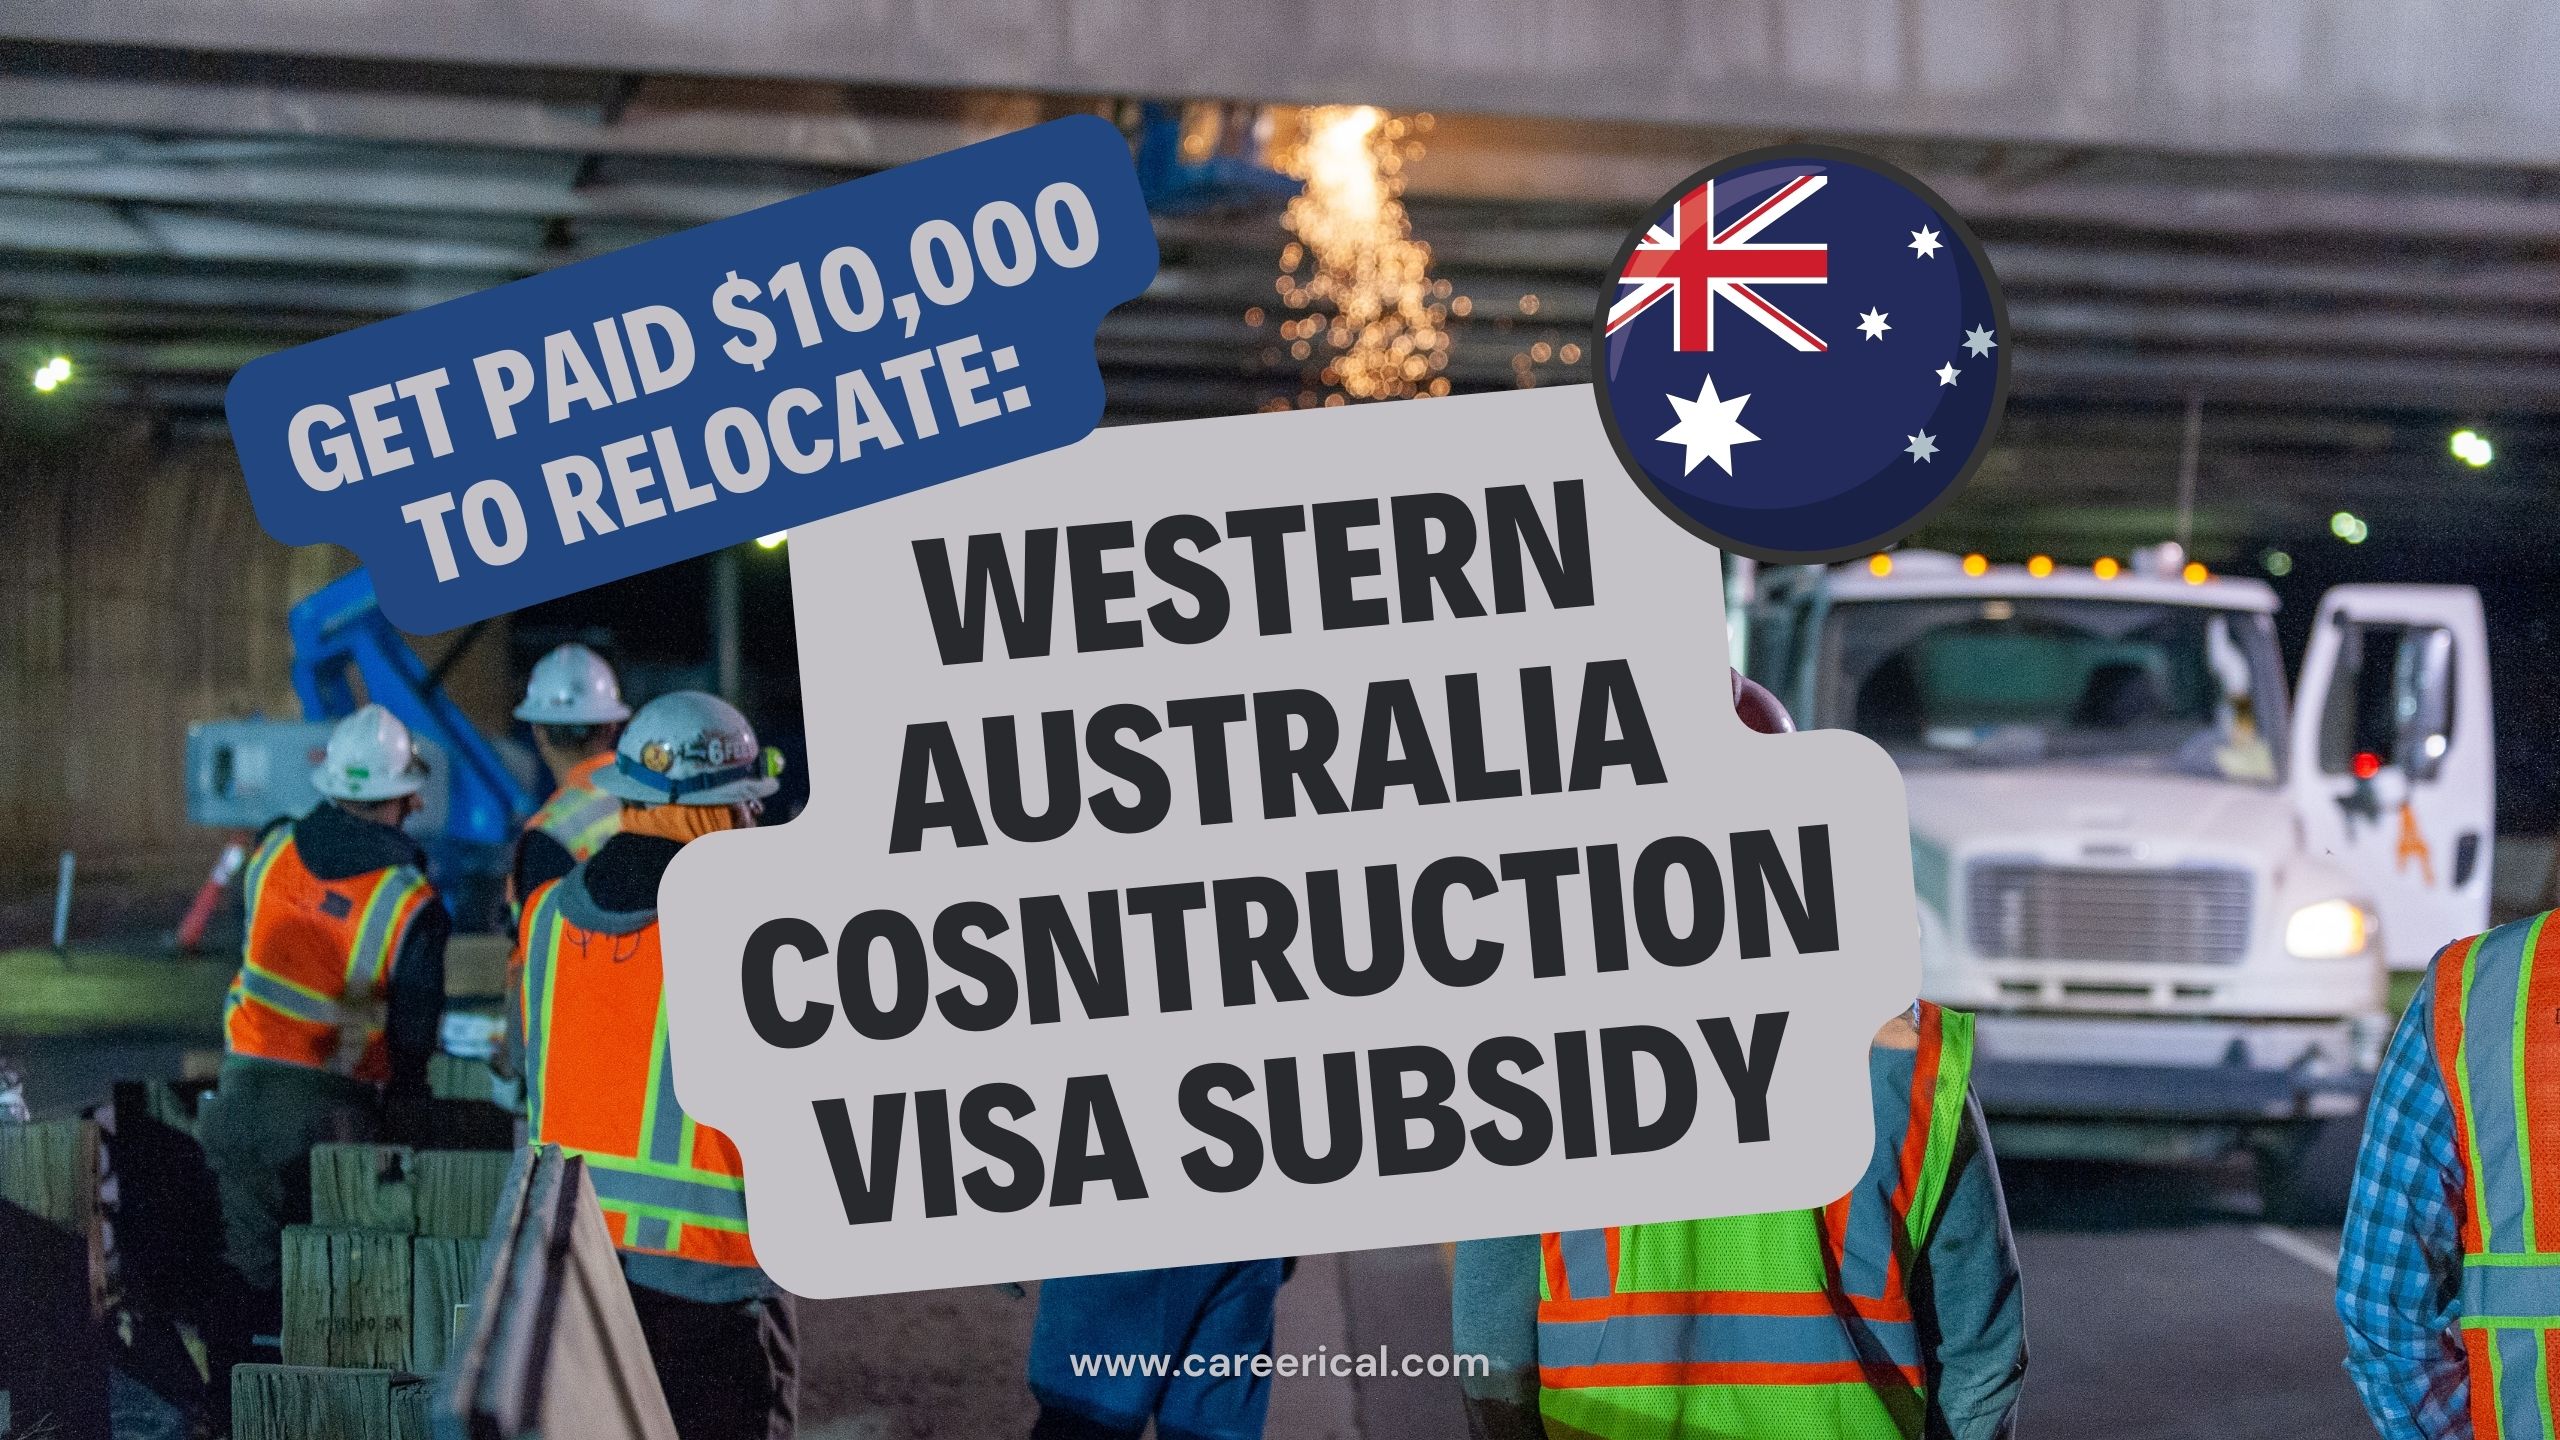 🇦🇺 Get Paid 10,000 to Relocate Western Australia Construction Visa